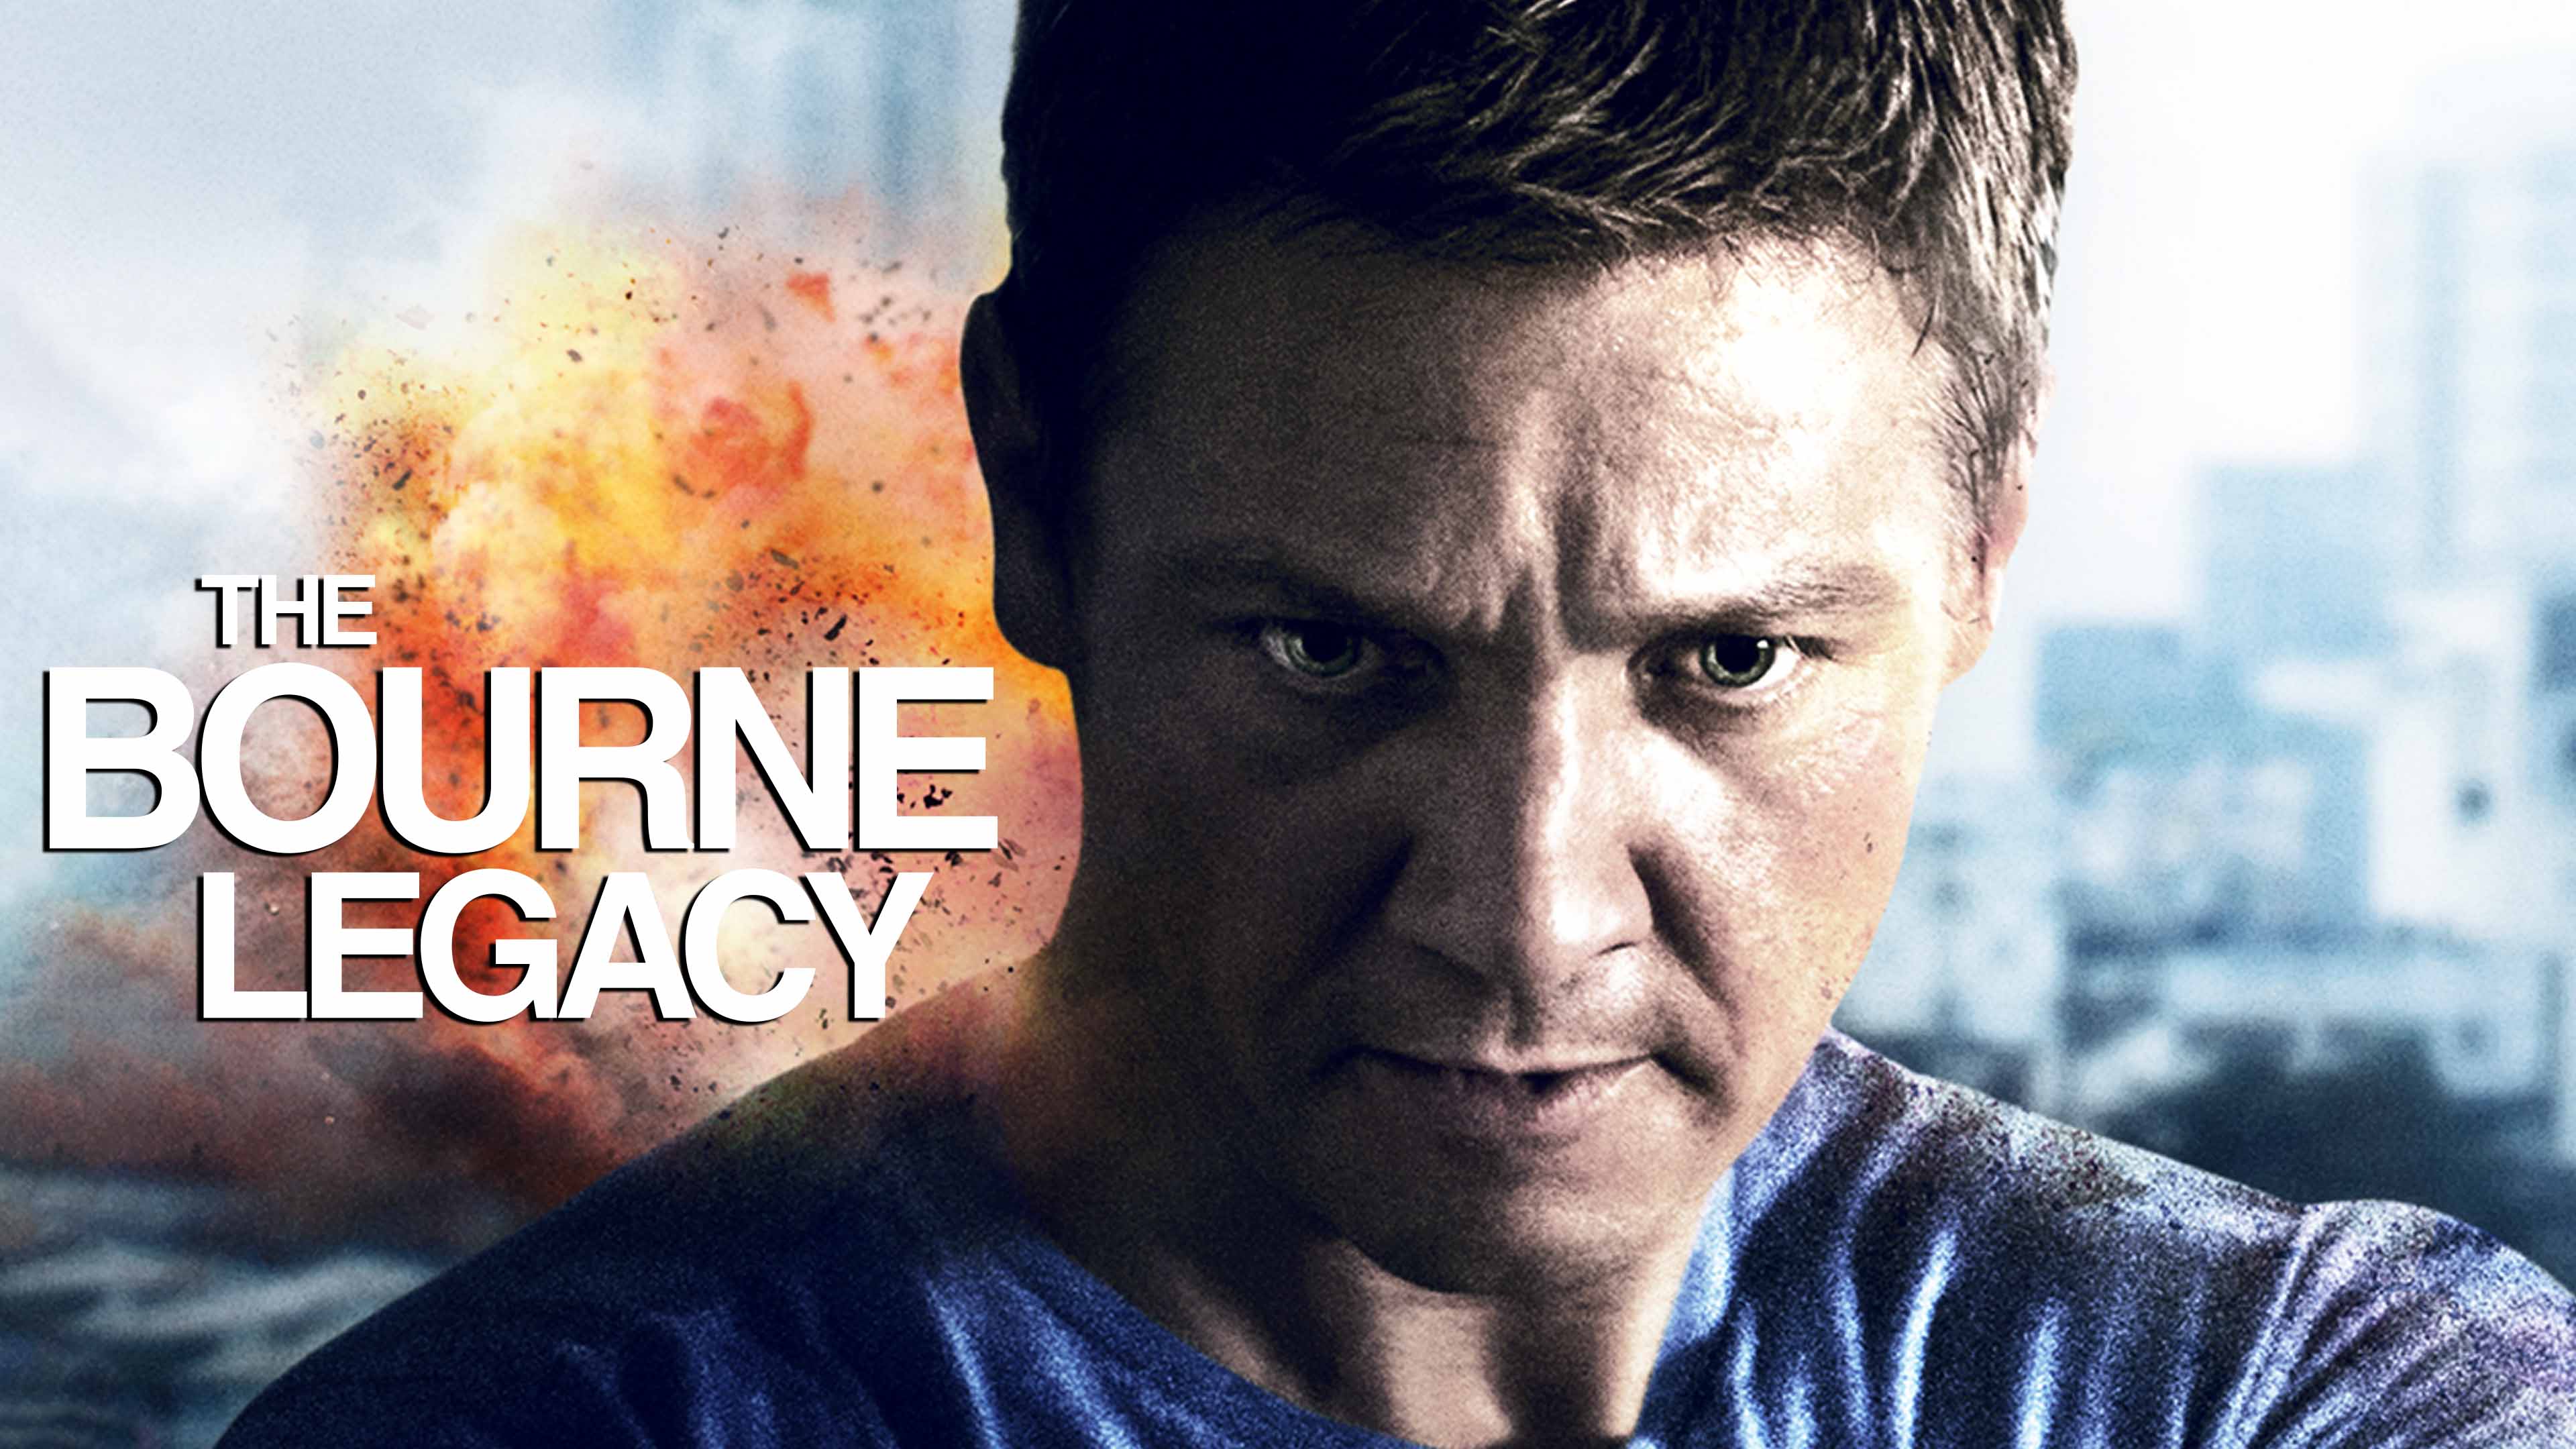 Watch The Bourne Legacy Online | Stream Full Movies